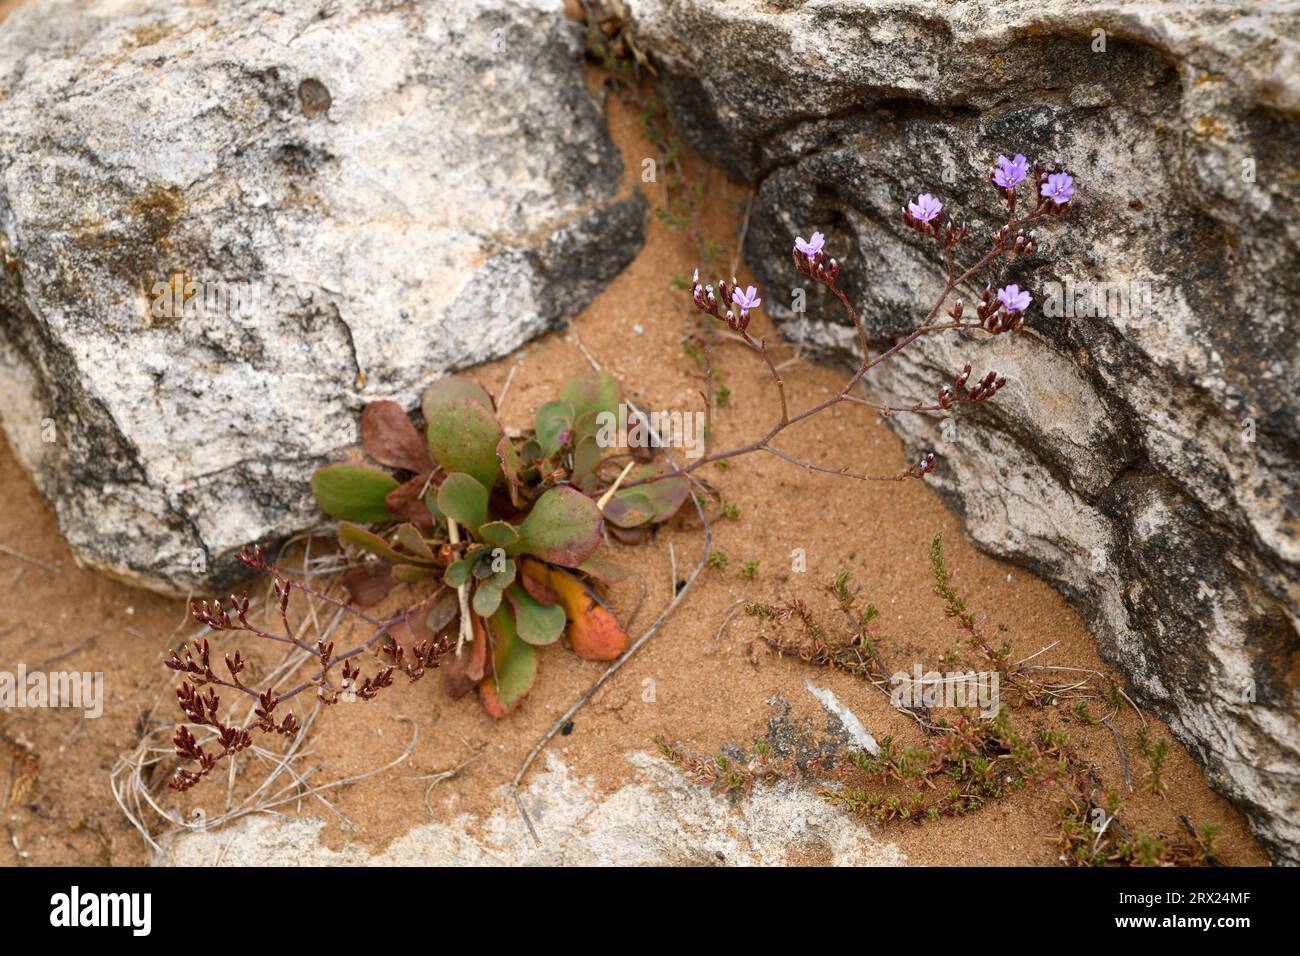 Limonium plurisquamatum is a perennial plant endemic to central coast of Portugal. This photo was taken in Cabo Carvoeiro, Peniche, Portugal. Stock Photo